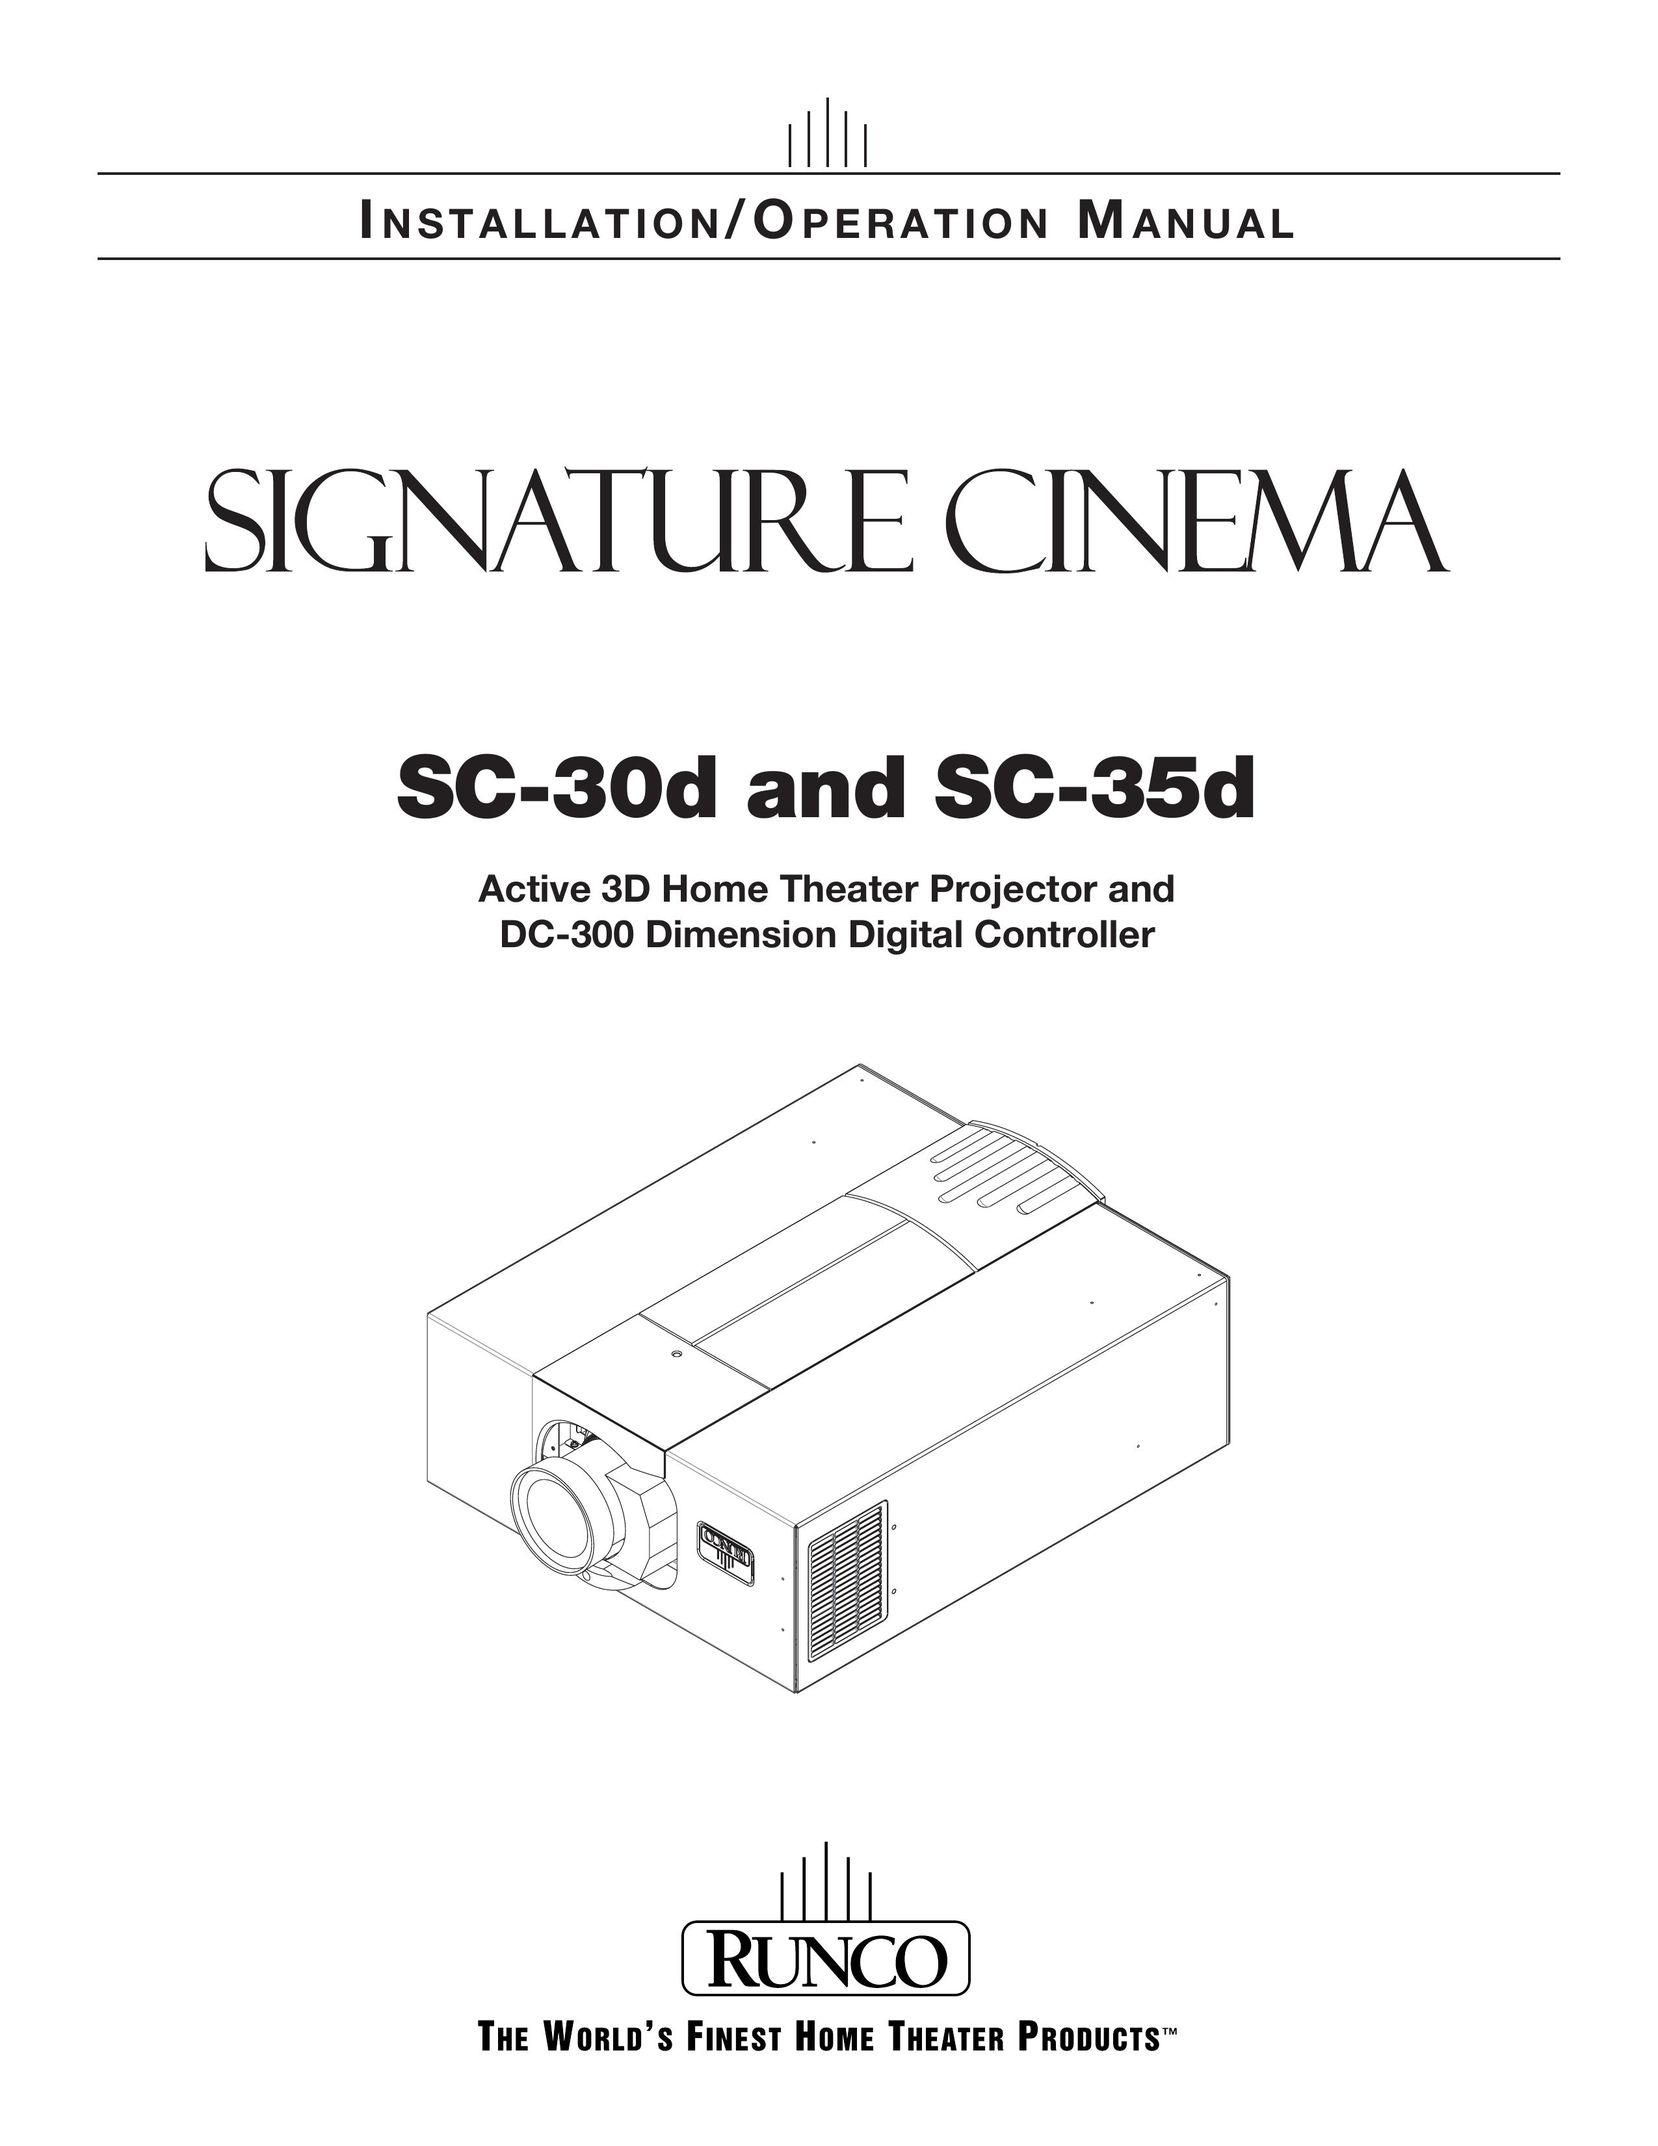 Runco SC-30d Home Theater System User Manual